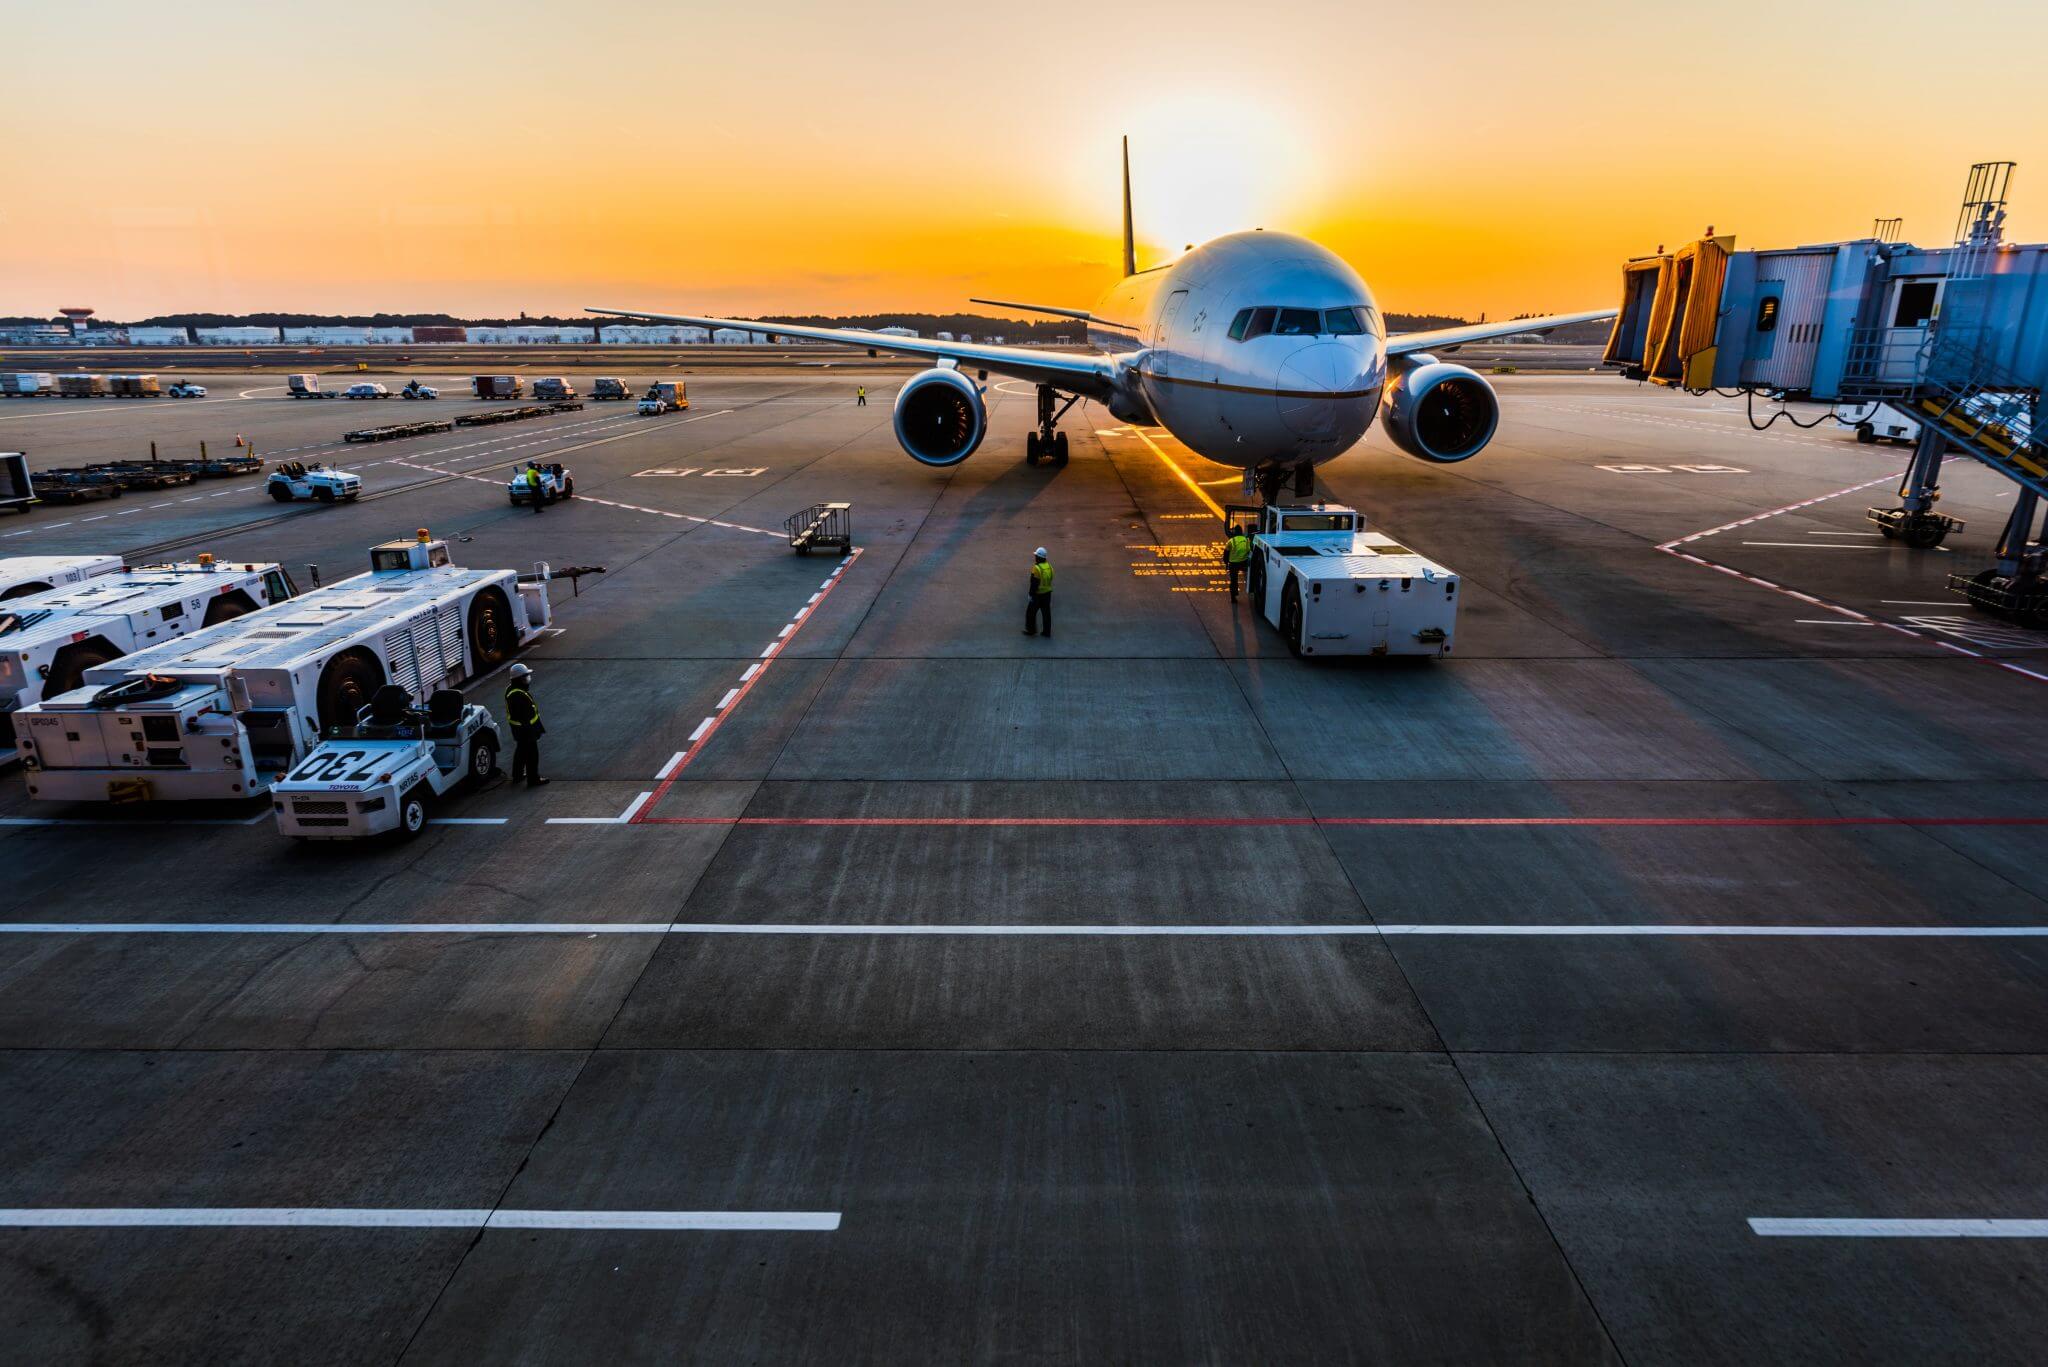 Enabling Australian airports to become Cyber Resilient